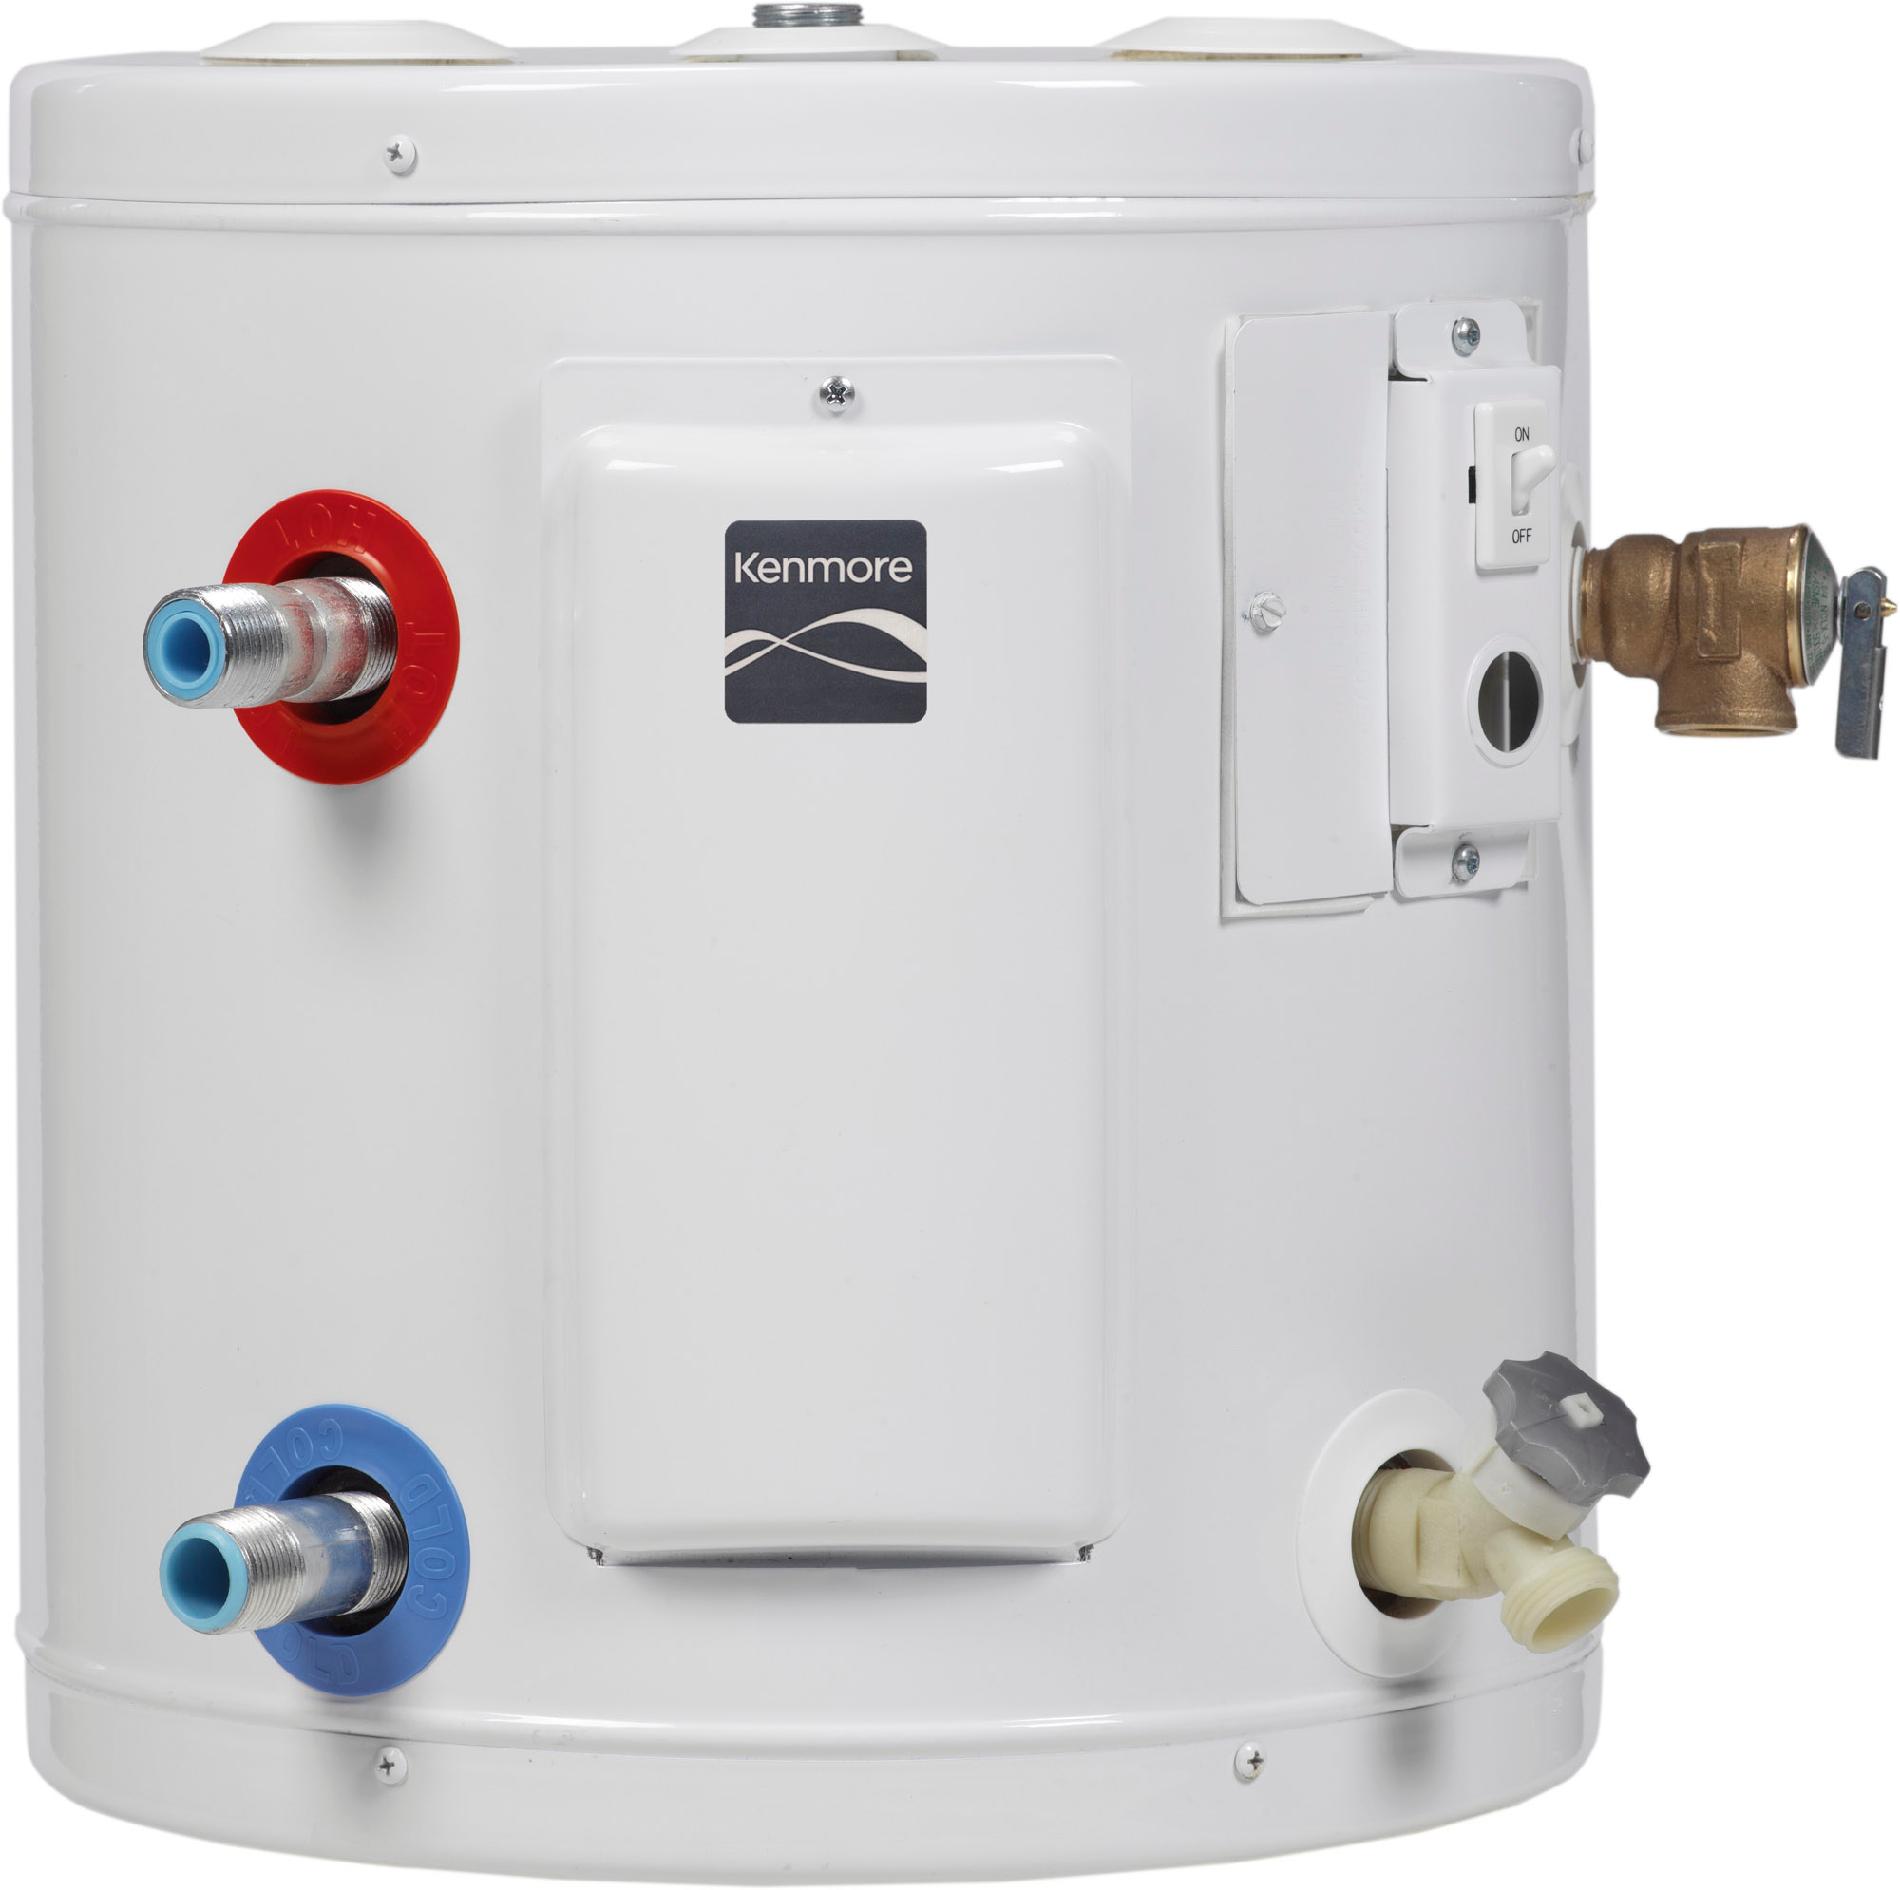 kenmore-31607-20-gal-6-year-tall-compact-electric-water-heater-shop